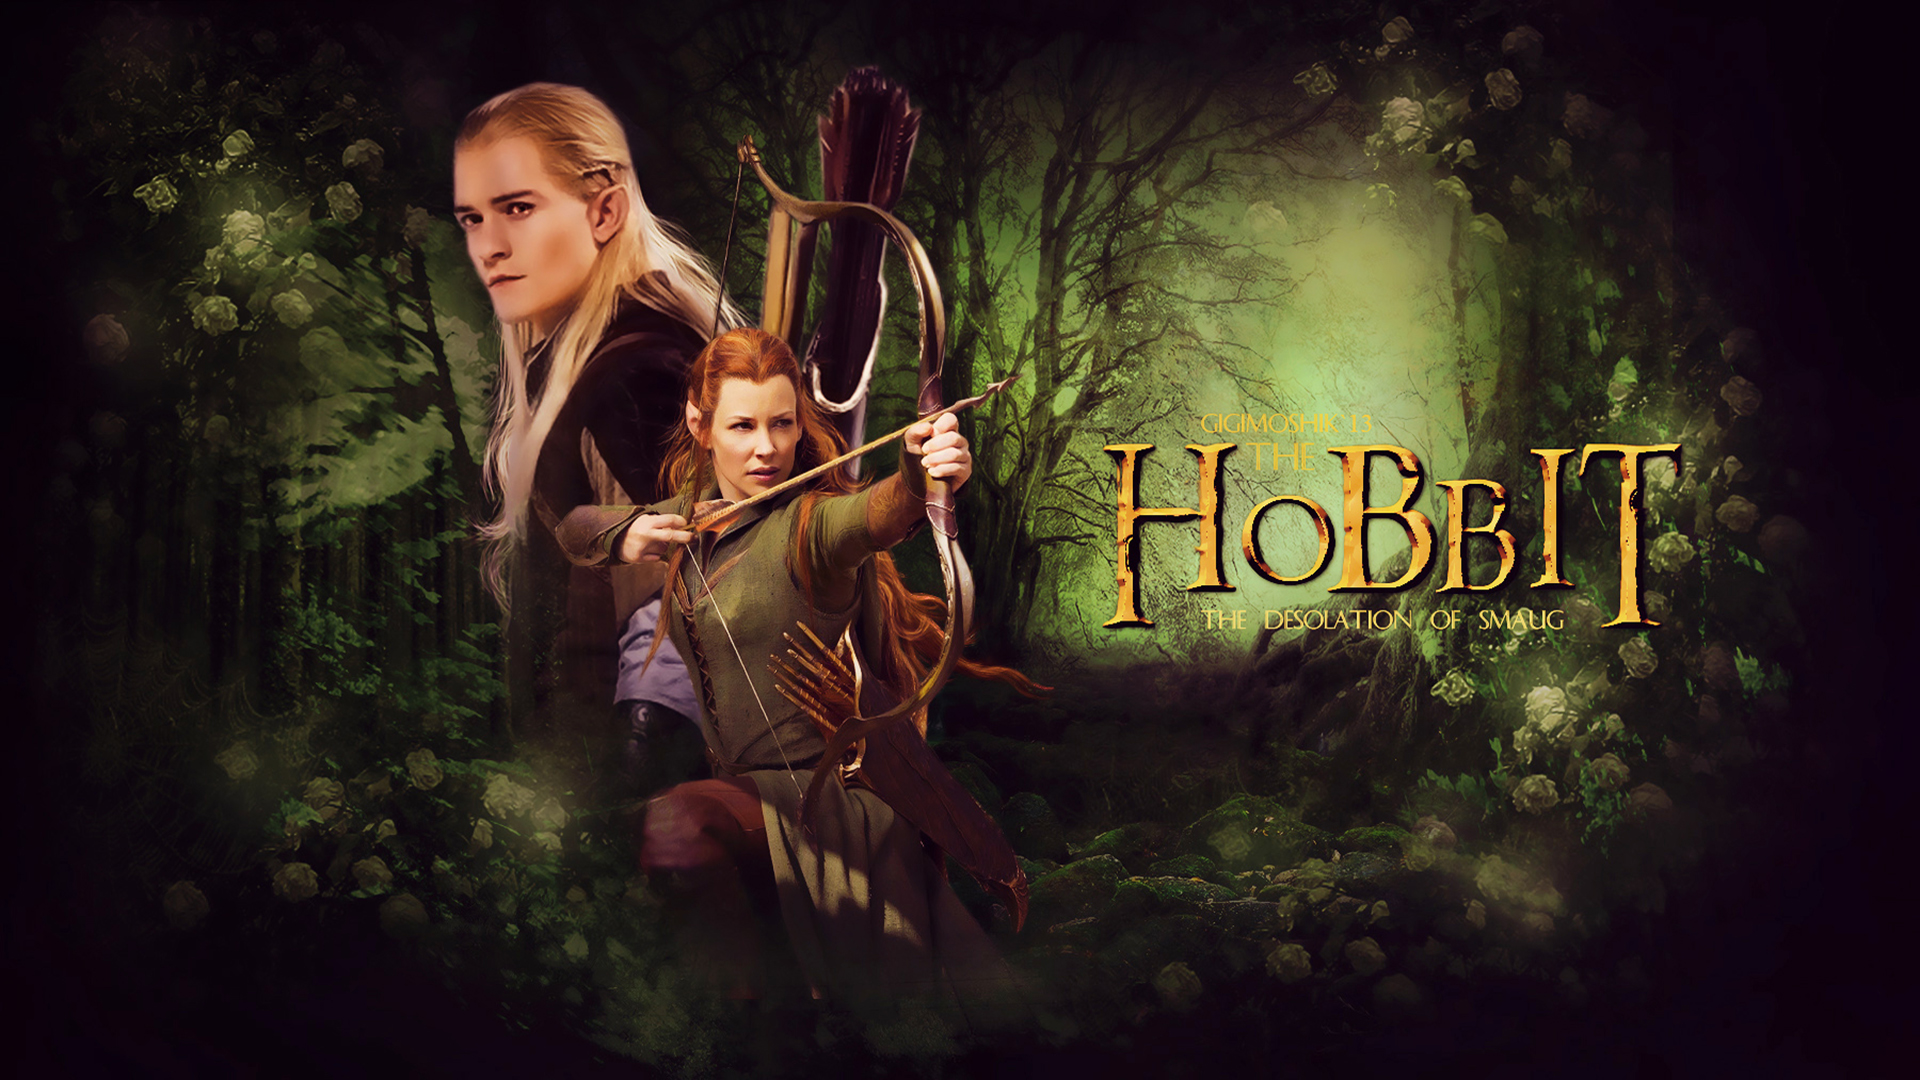 The Hobbit Desolation Of Smaug HD Wallpaper High Definition